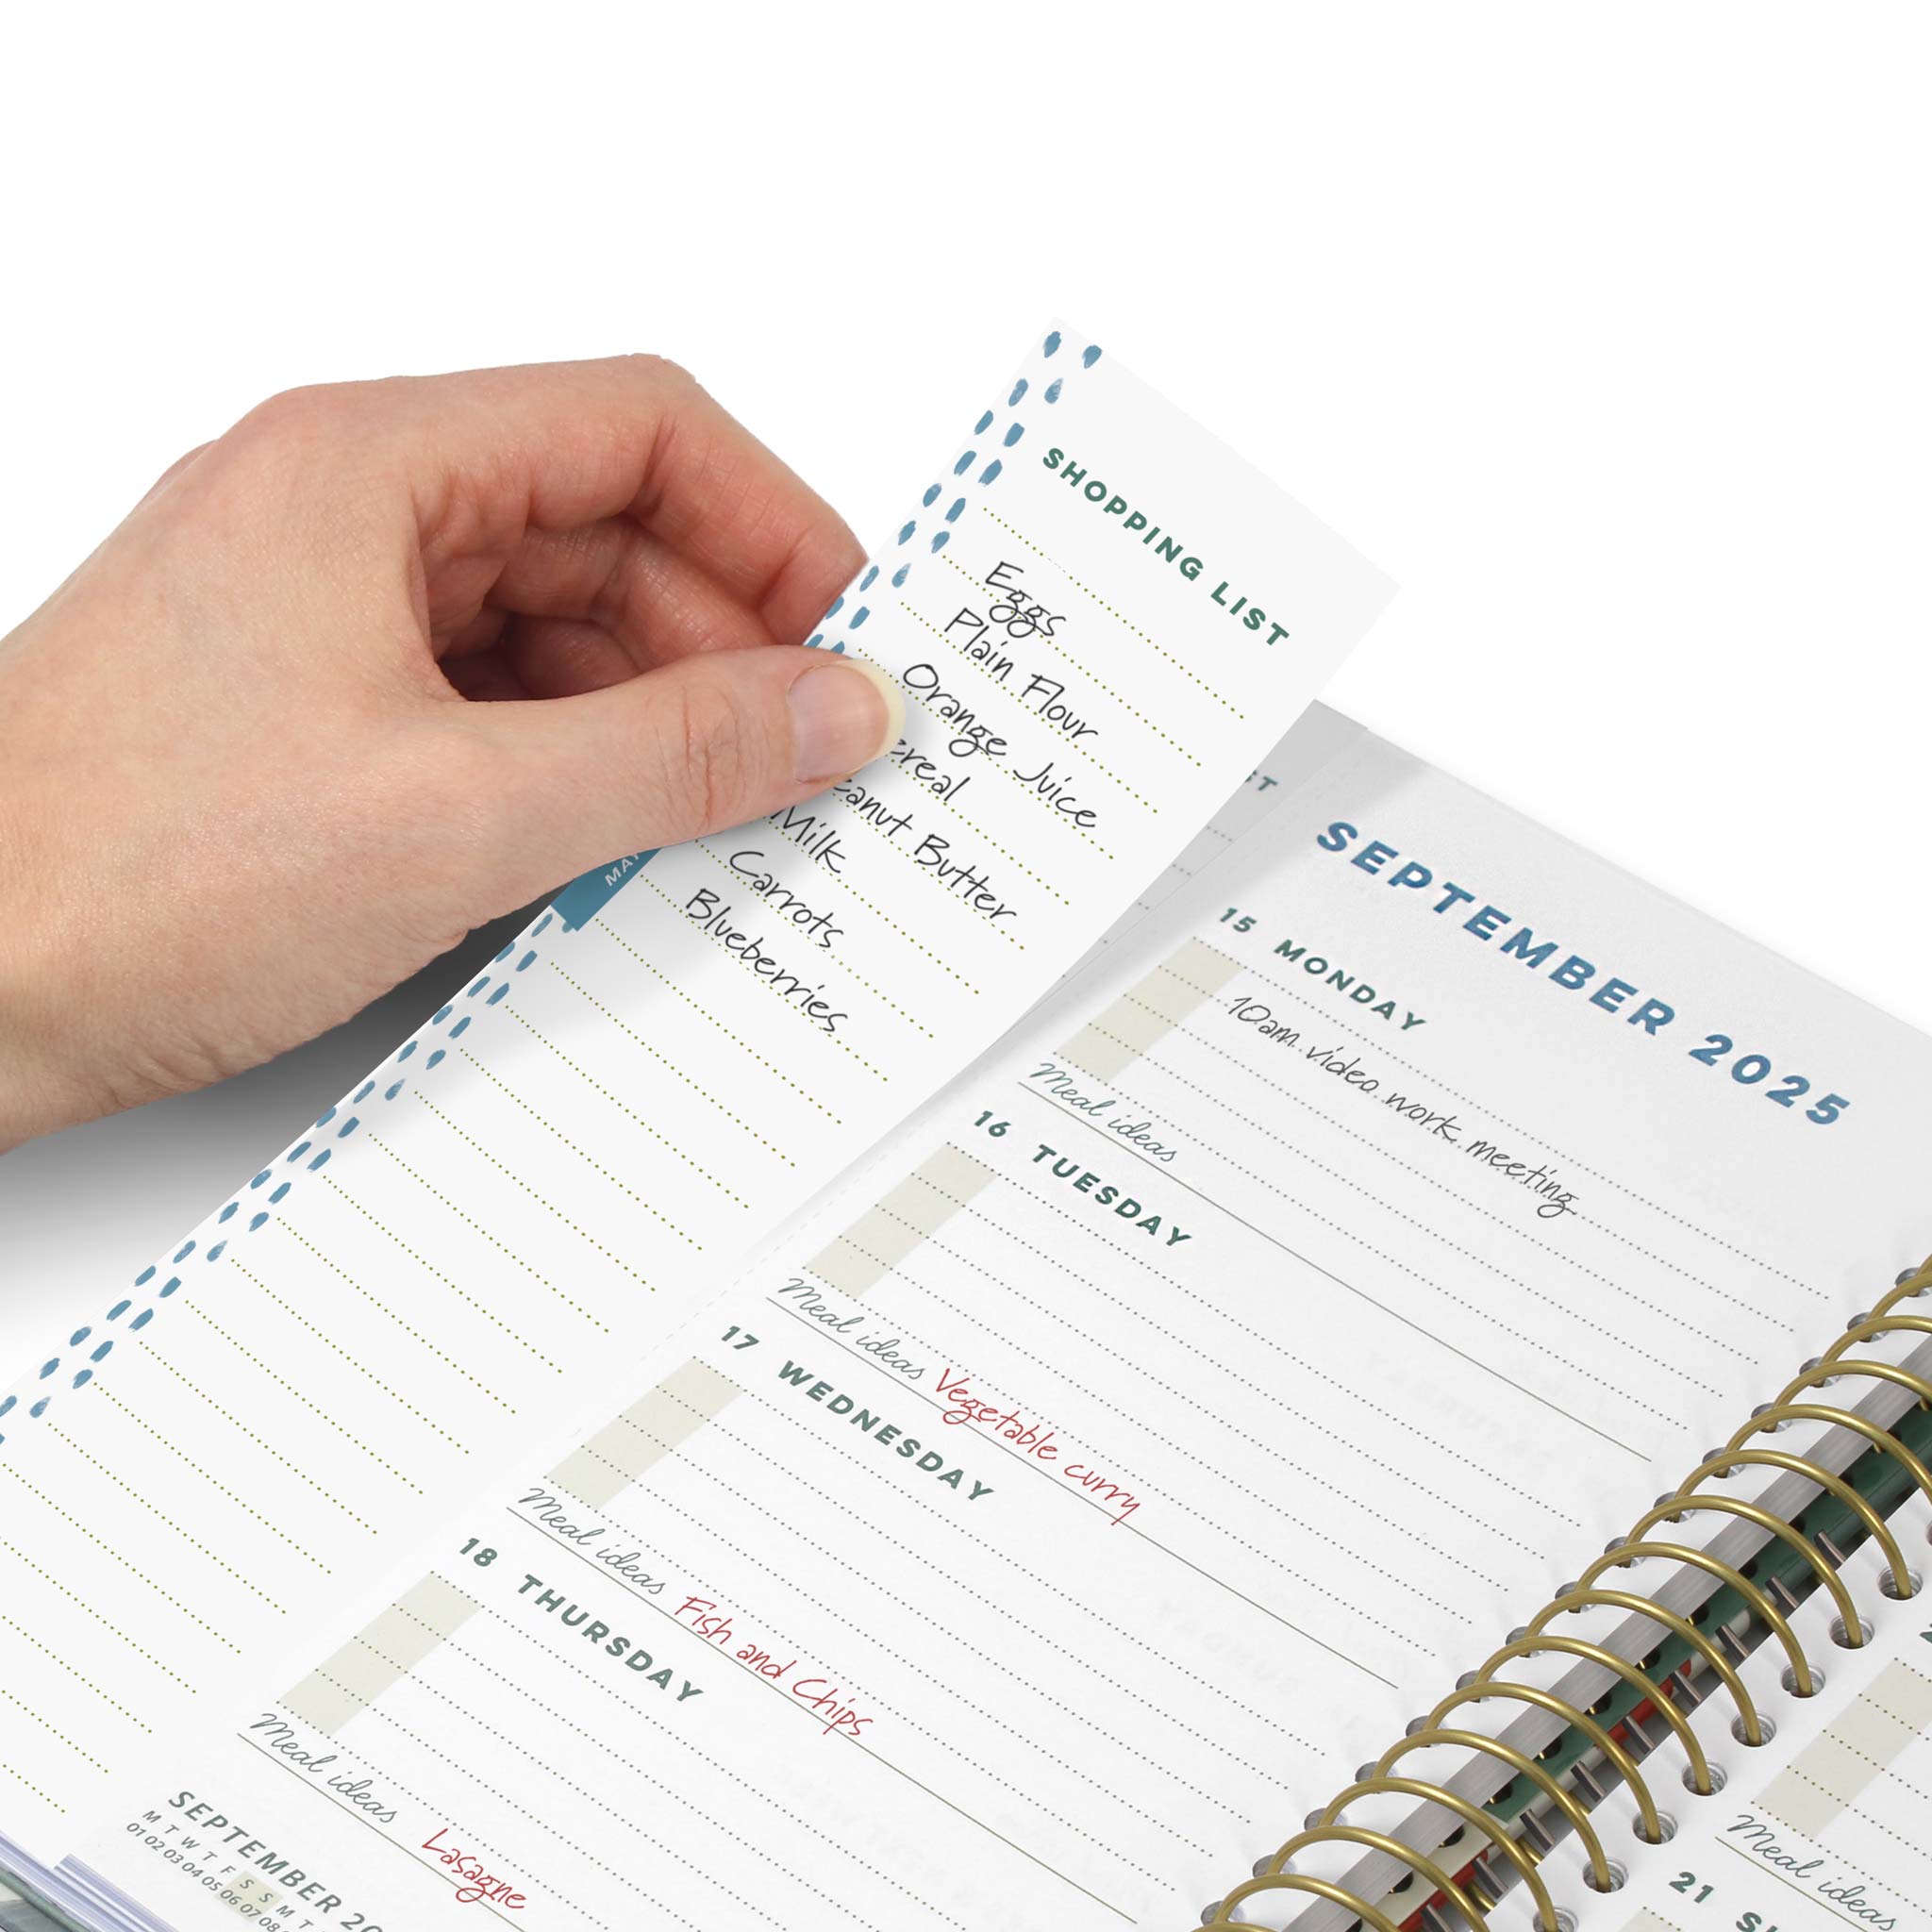 A hand removing a perforated shopping list from the diary